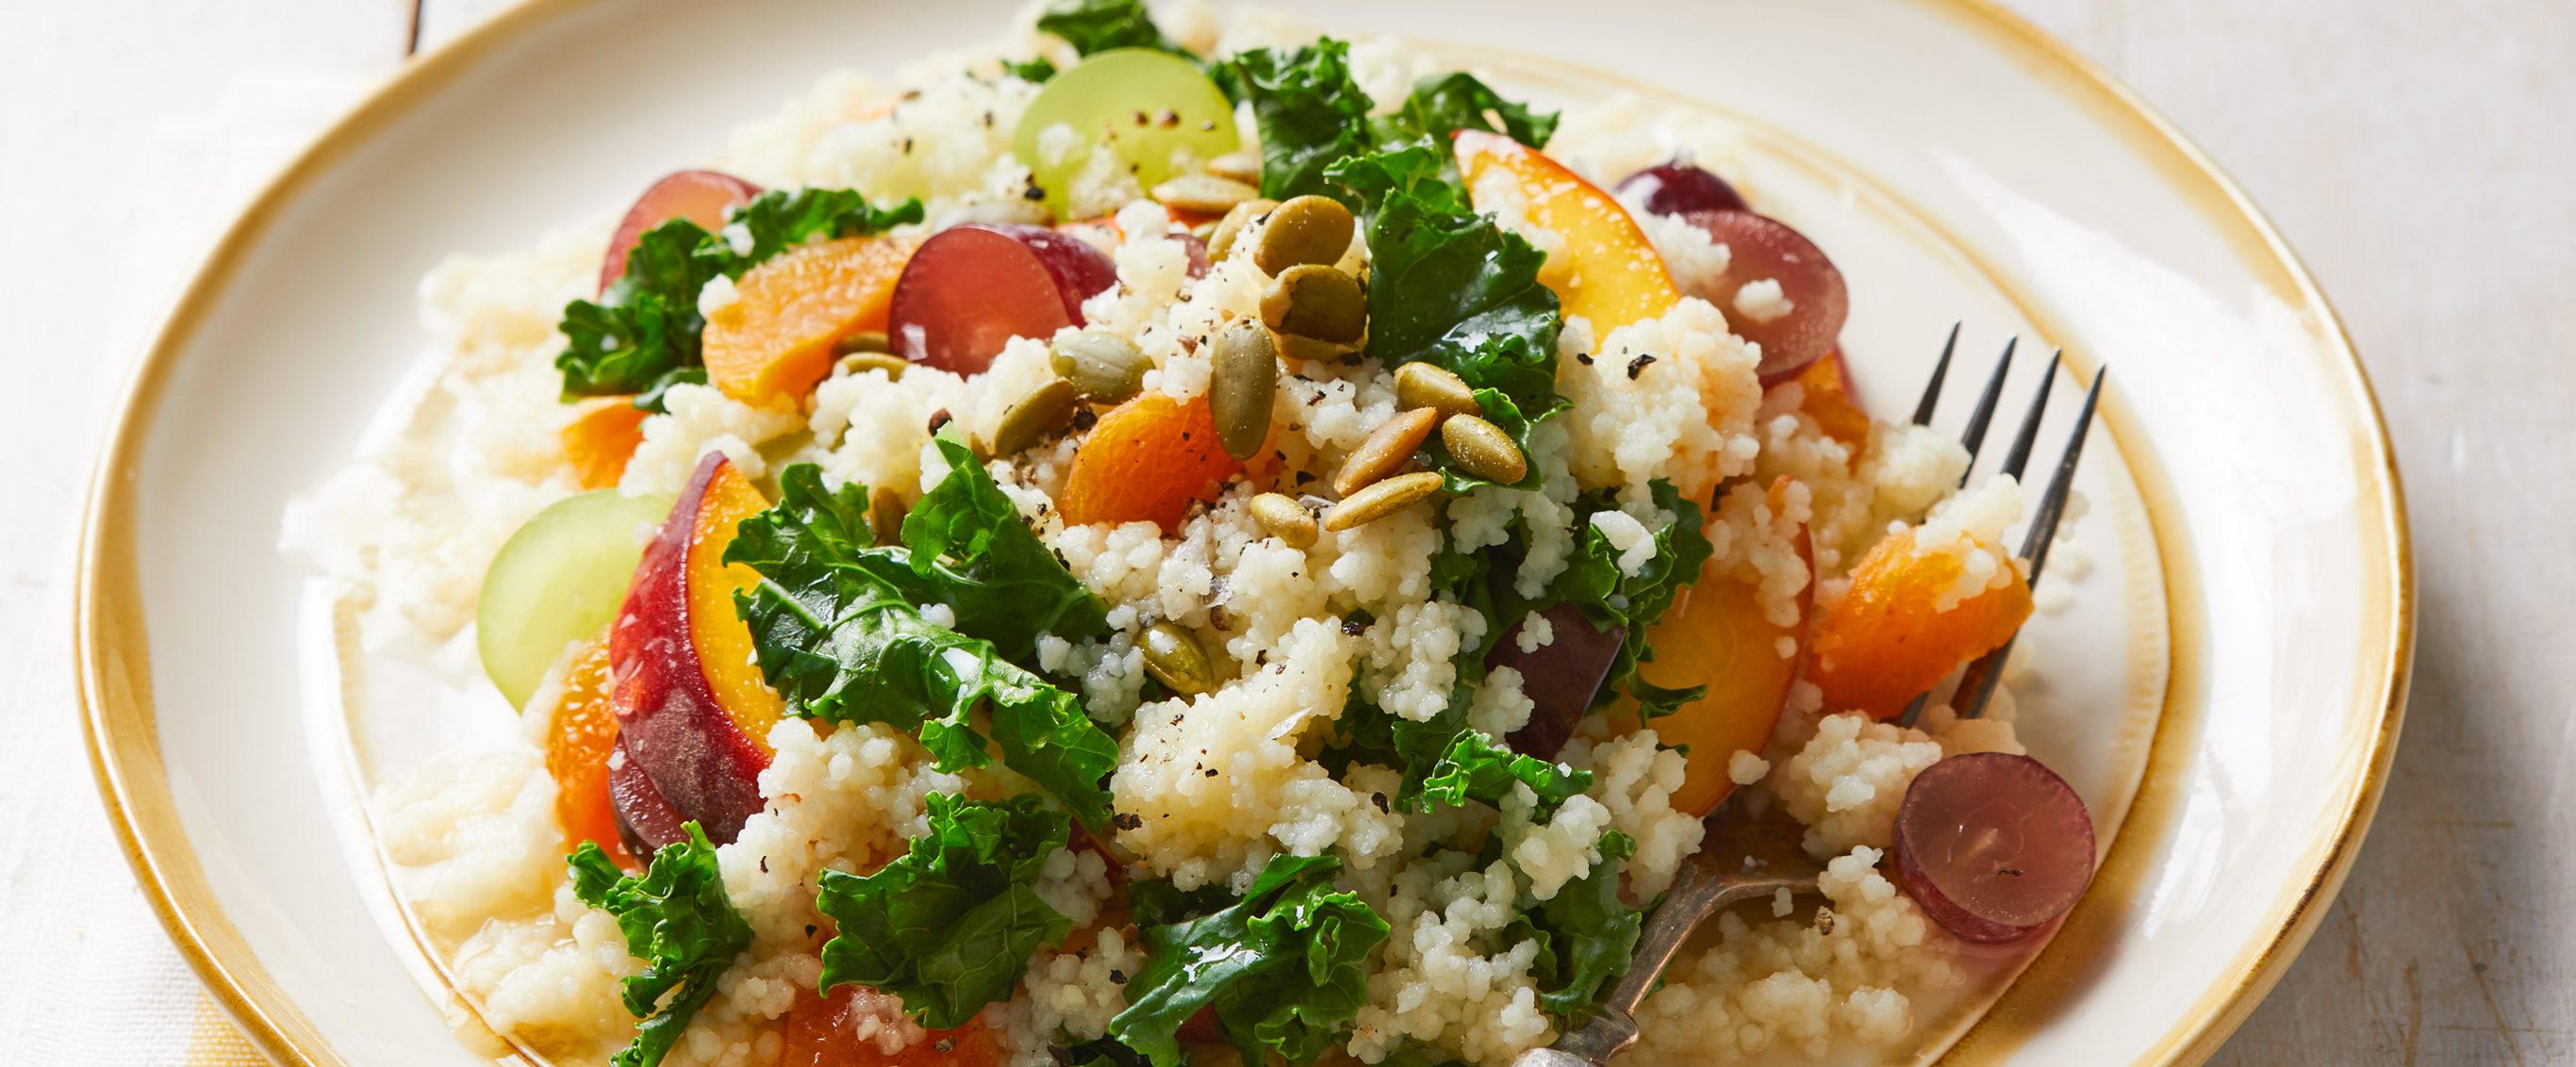 Couscous and Kale Breakfast Salad for Wordpress